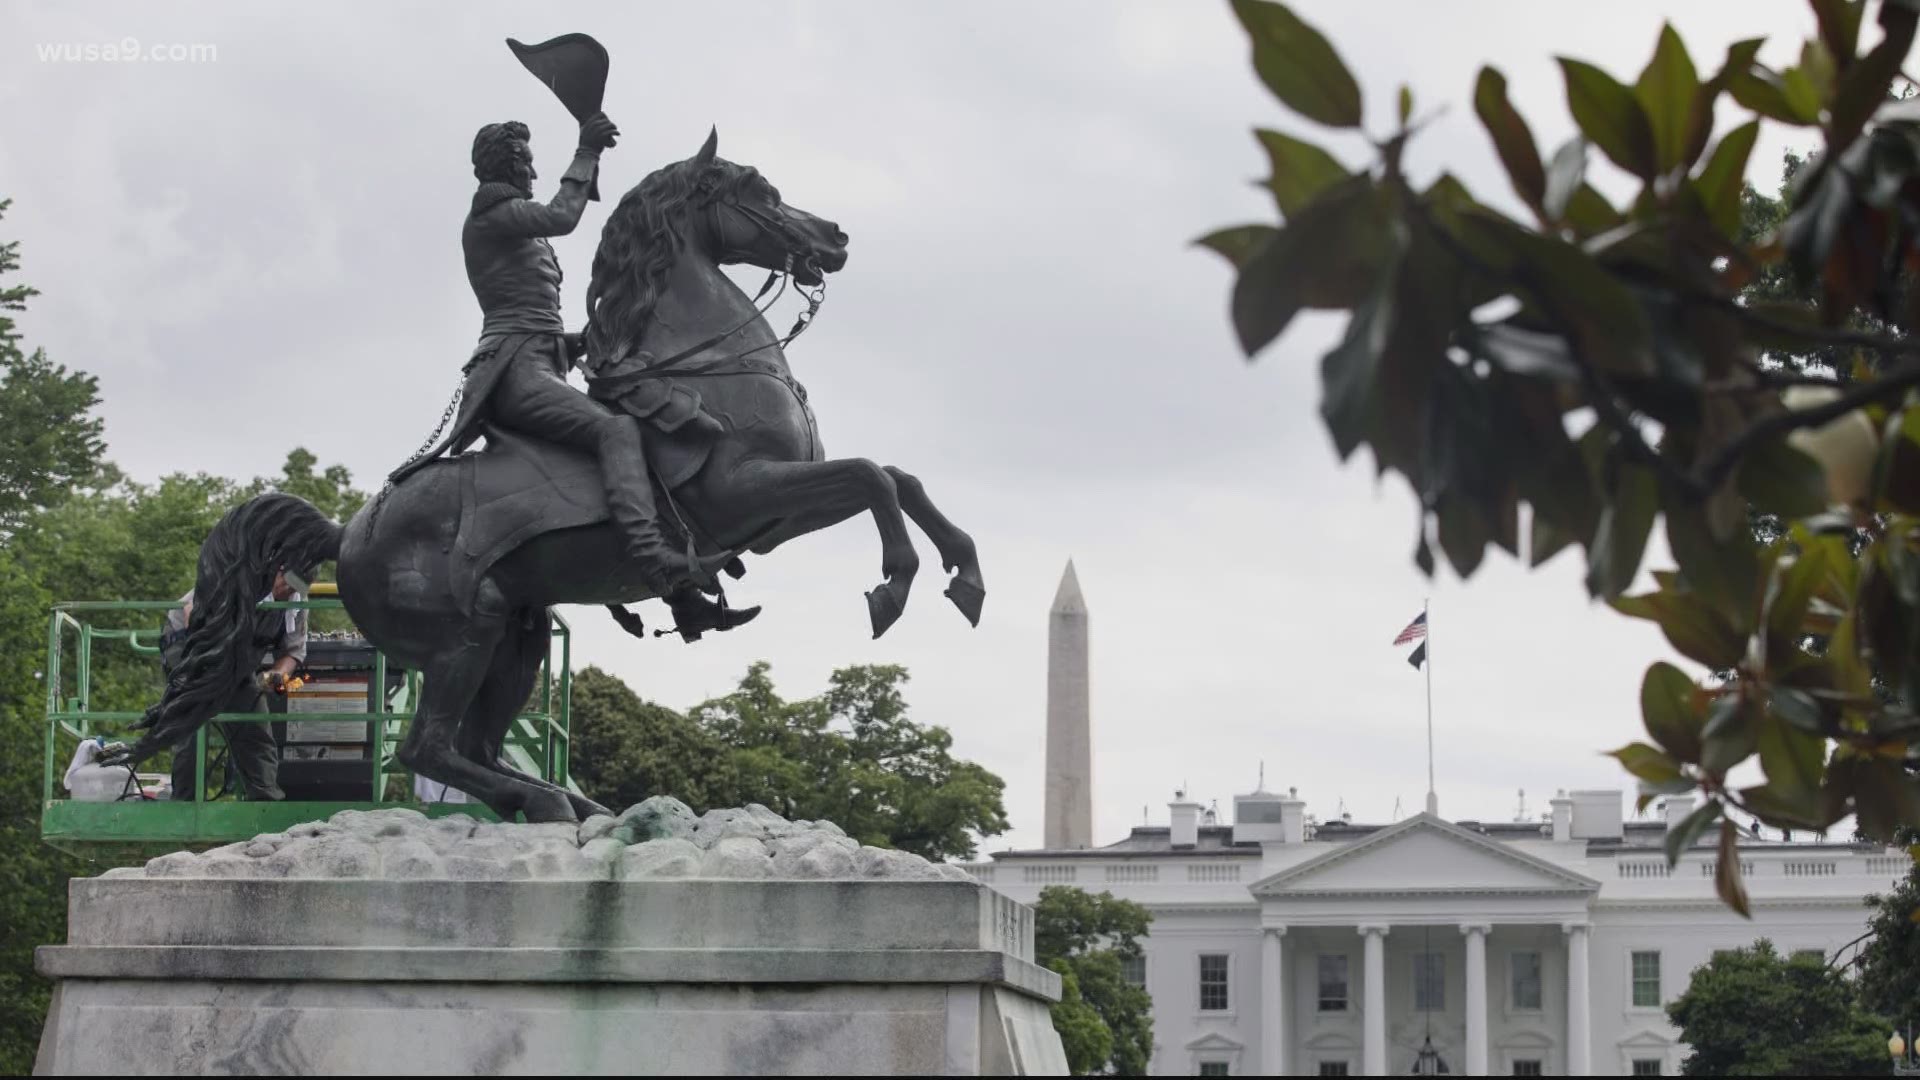 Bruce spoke with Dr Adam Domby, a historian, to talk about Andrew Jackson and the history behind Confederate statues